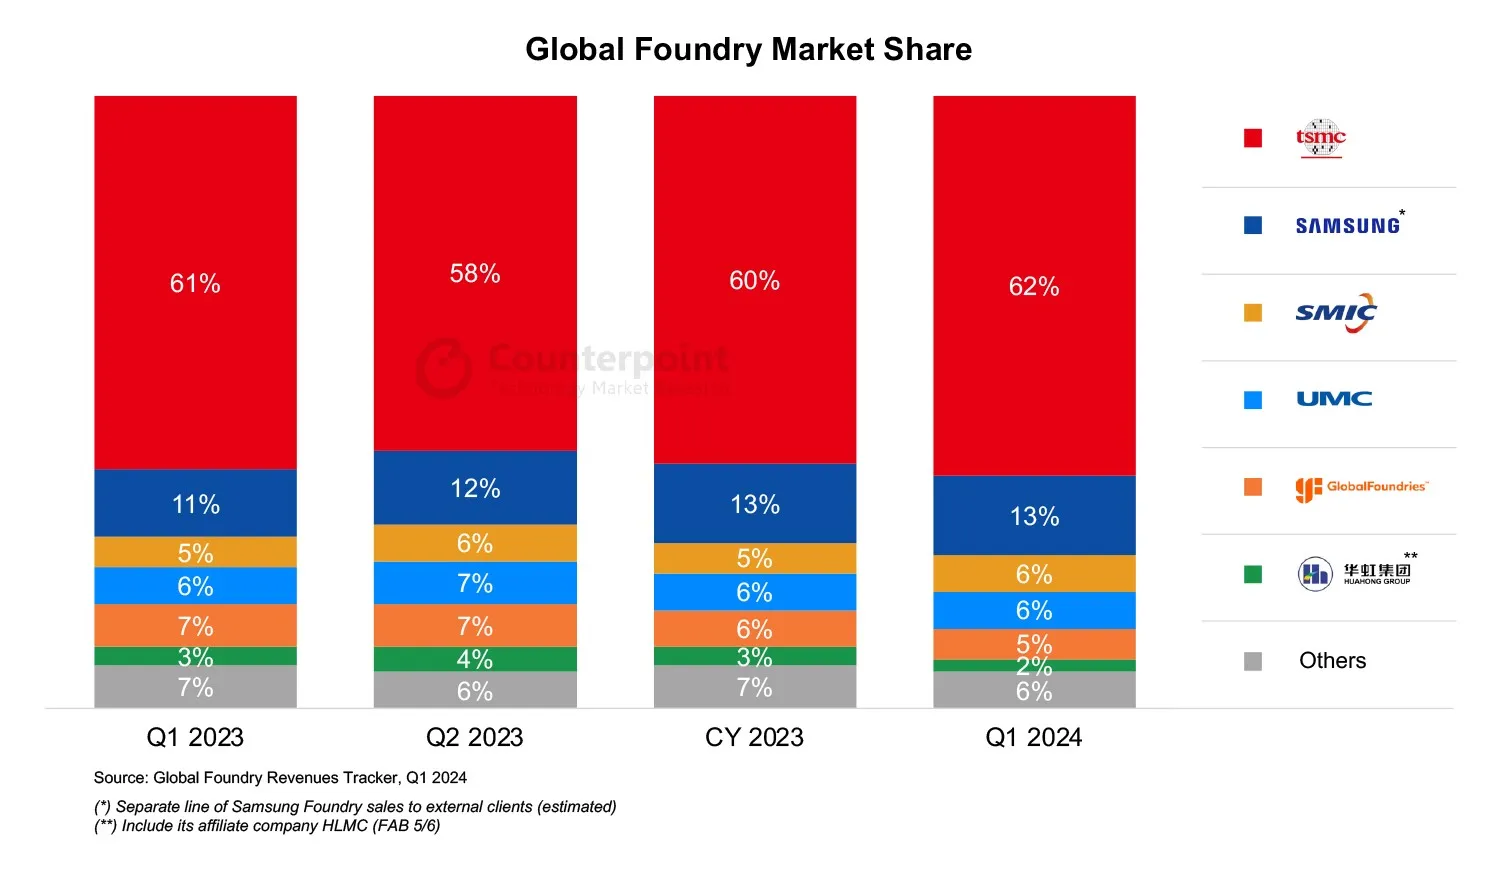 Counterpoint releases global foundry rankings-SemiMedia